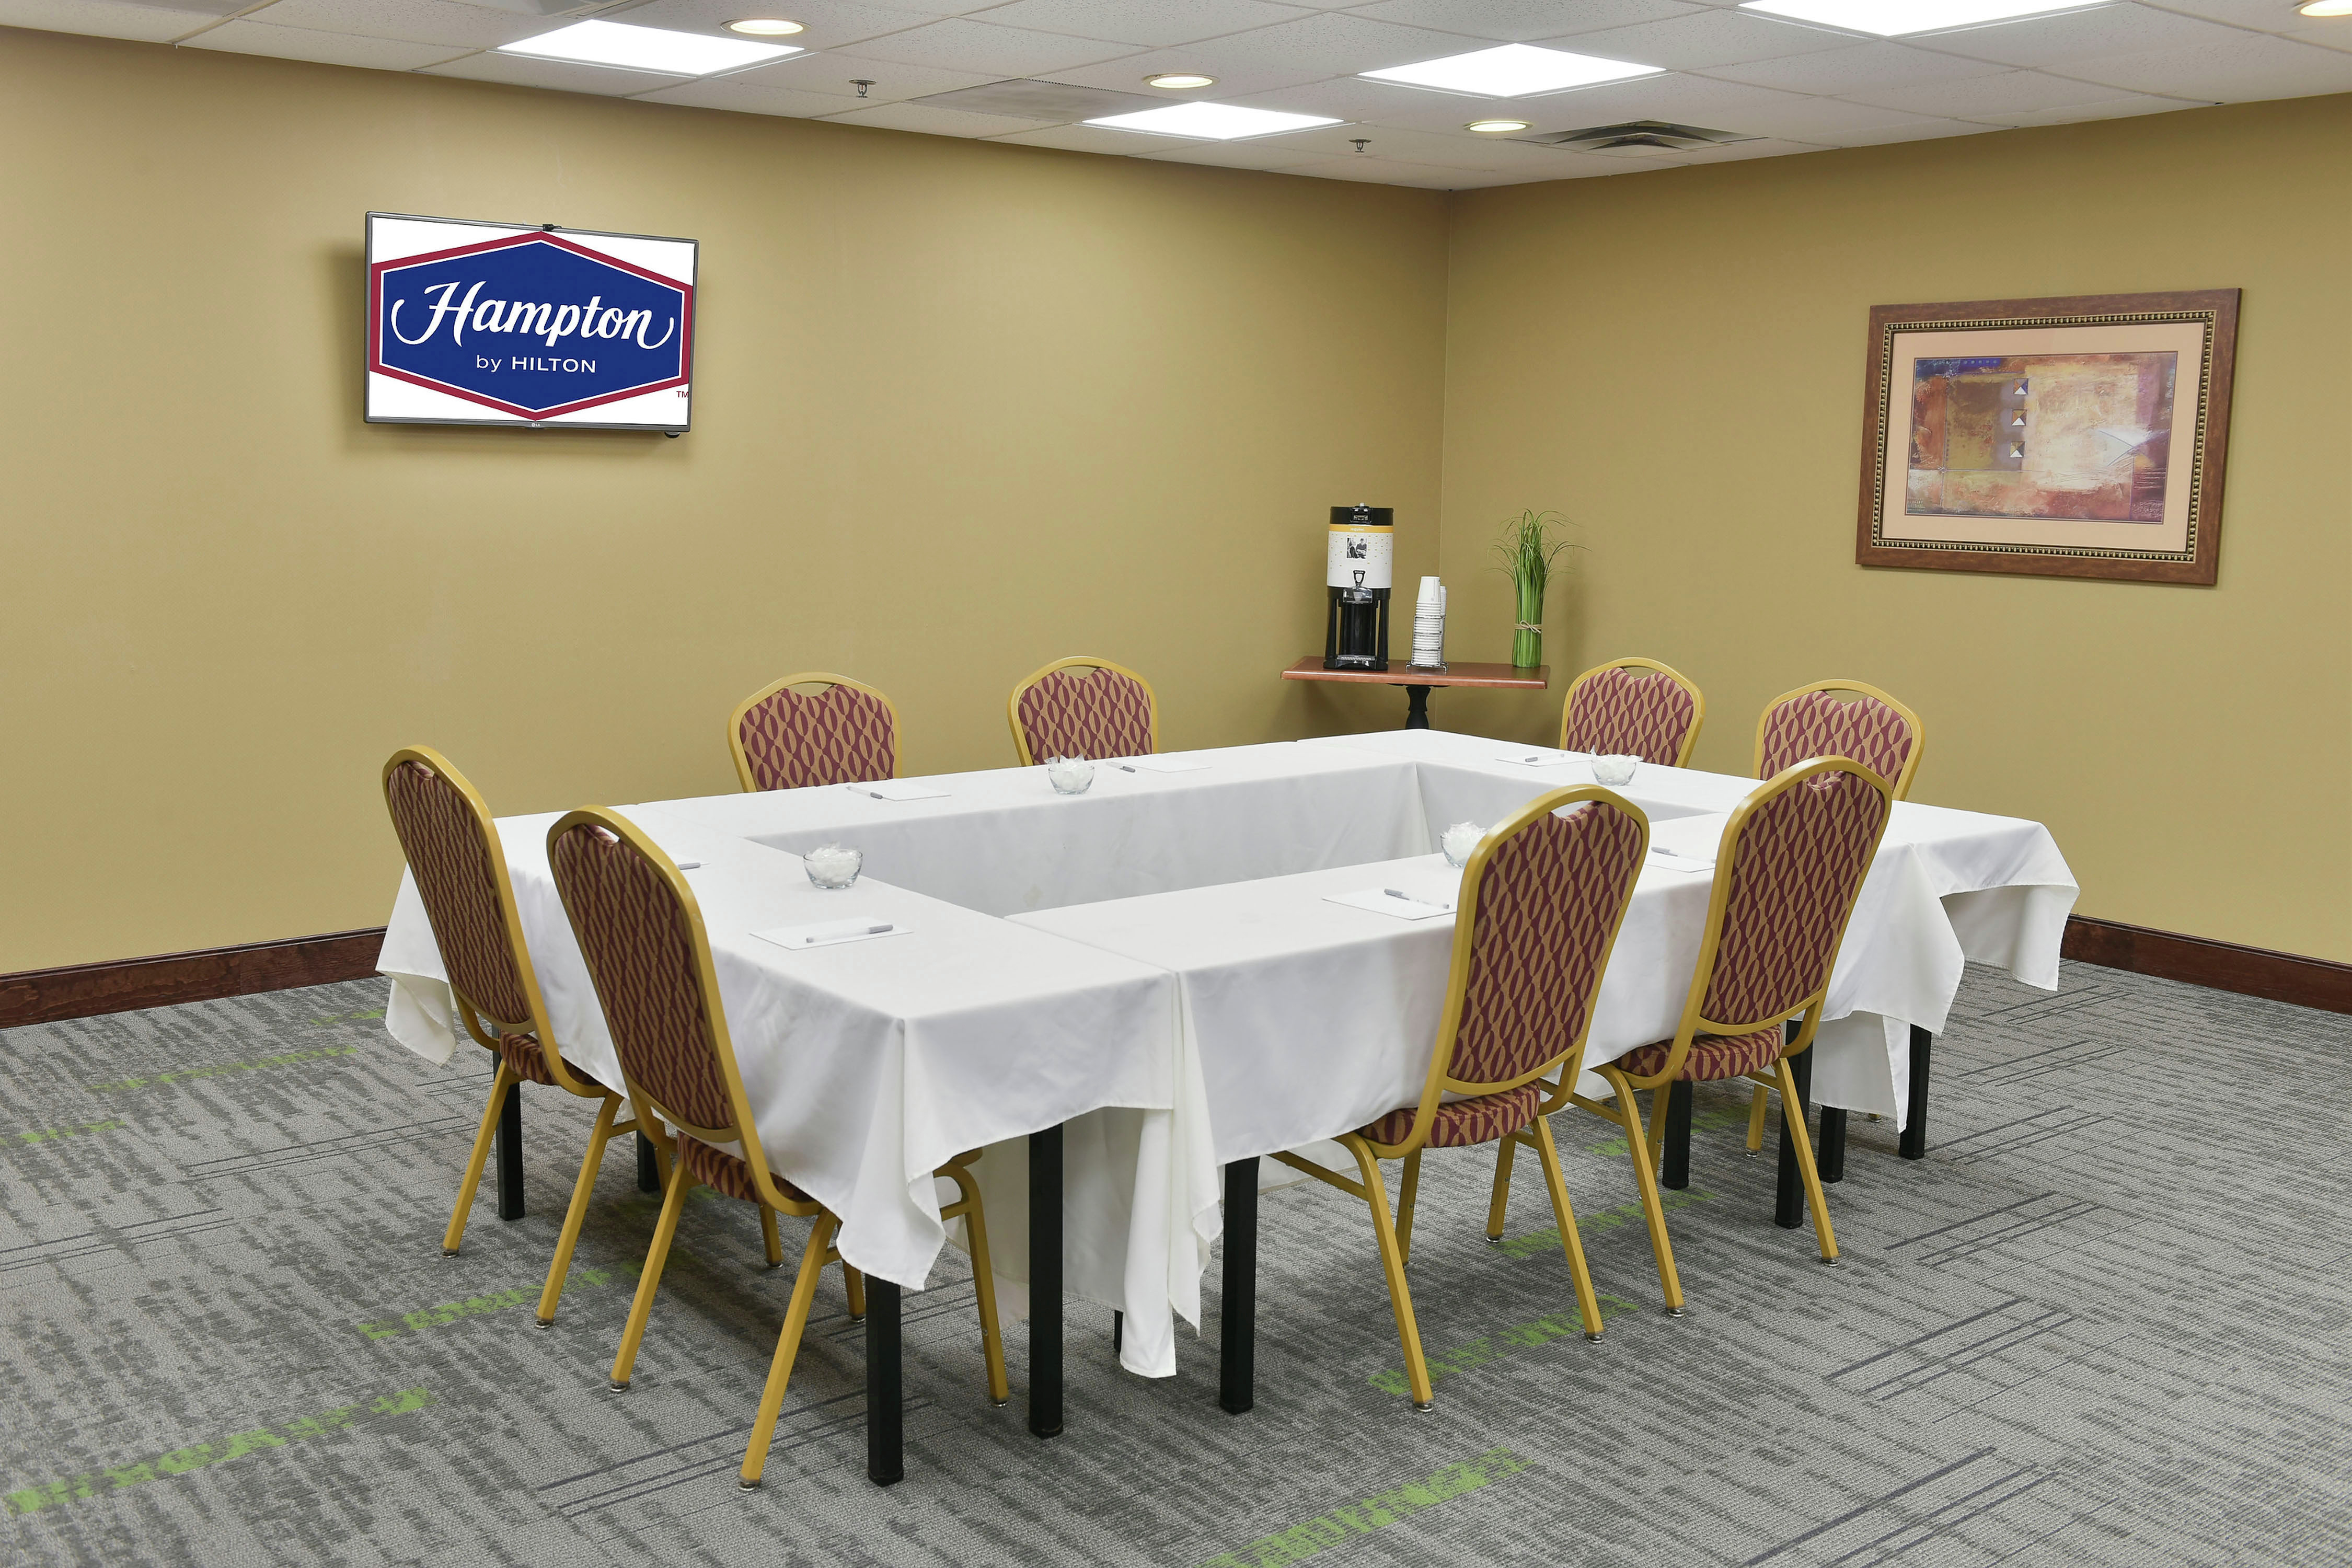 The Racer Room accomodates up to 50 individuals.